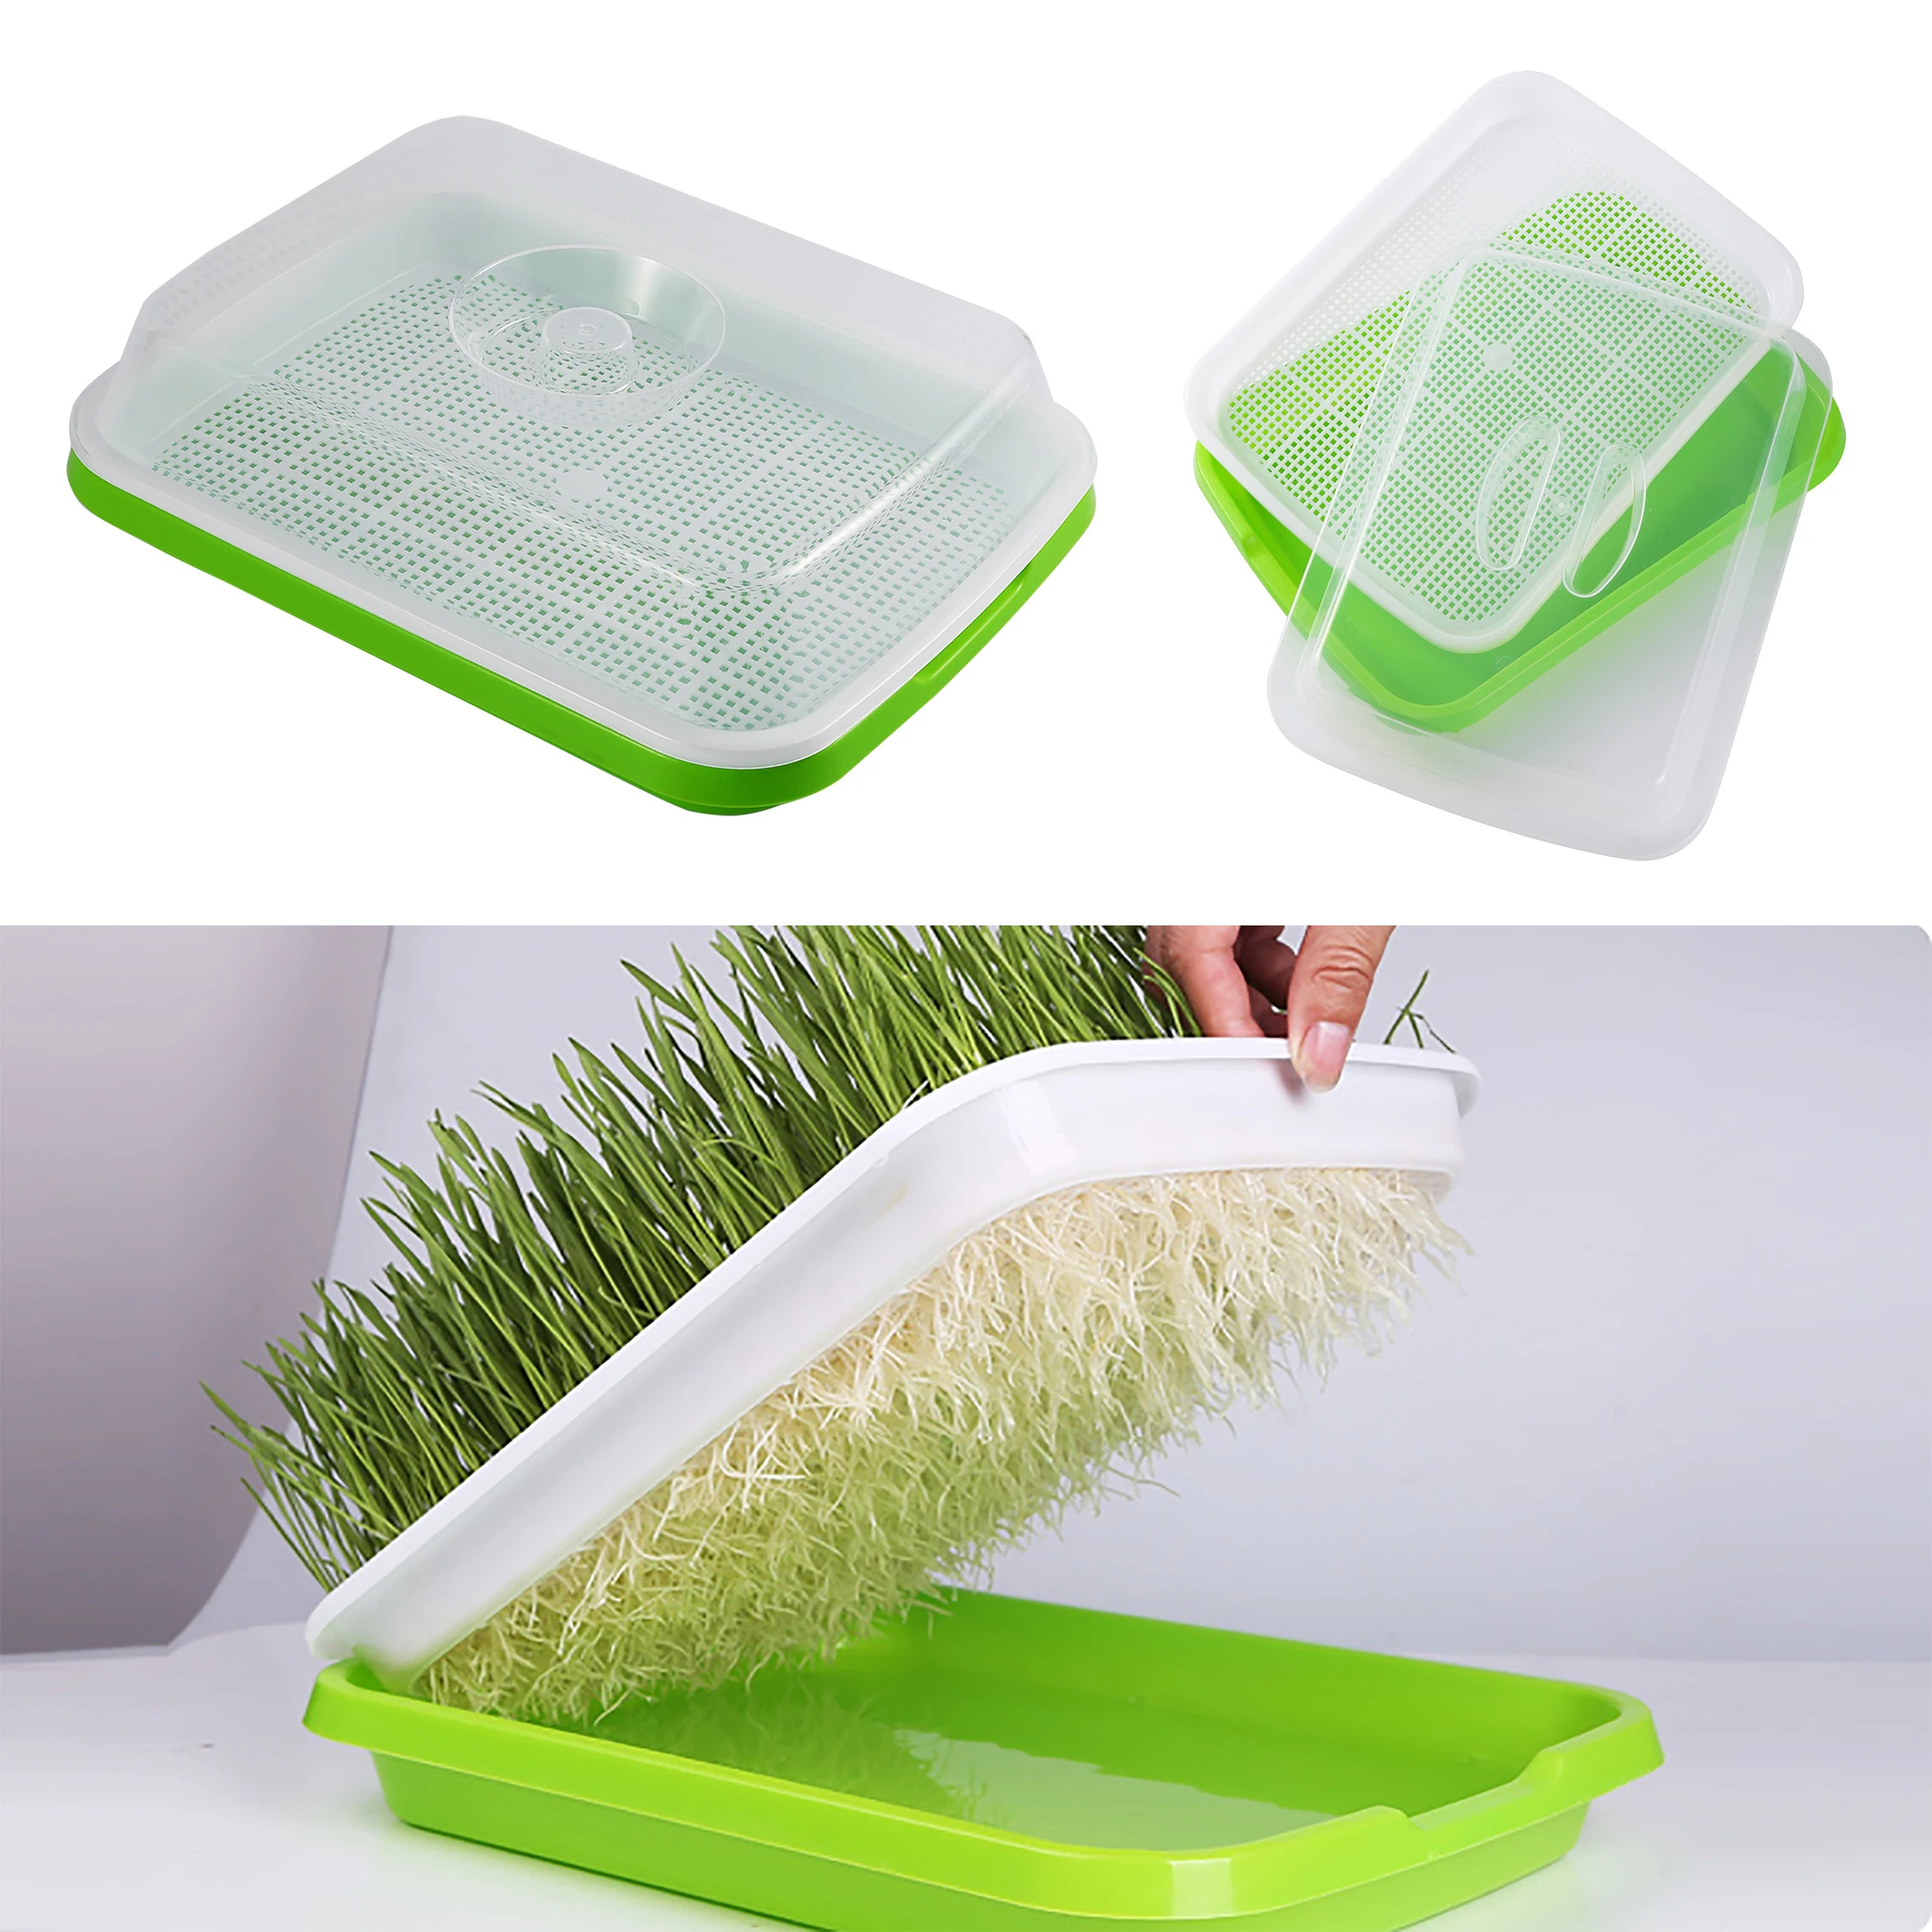 Germination Tray Tray Seed Germination Tray Seedling Tray Wheatgrass Seed Planting Soilless Cultivation Planting Pot